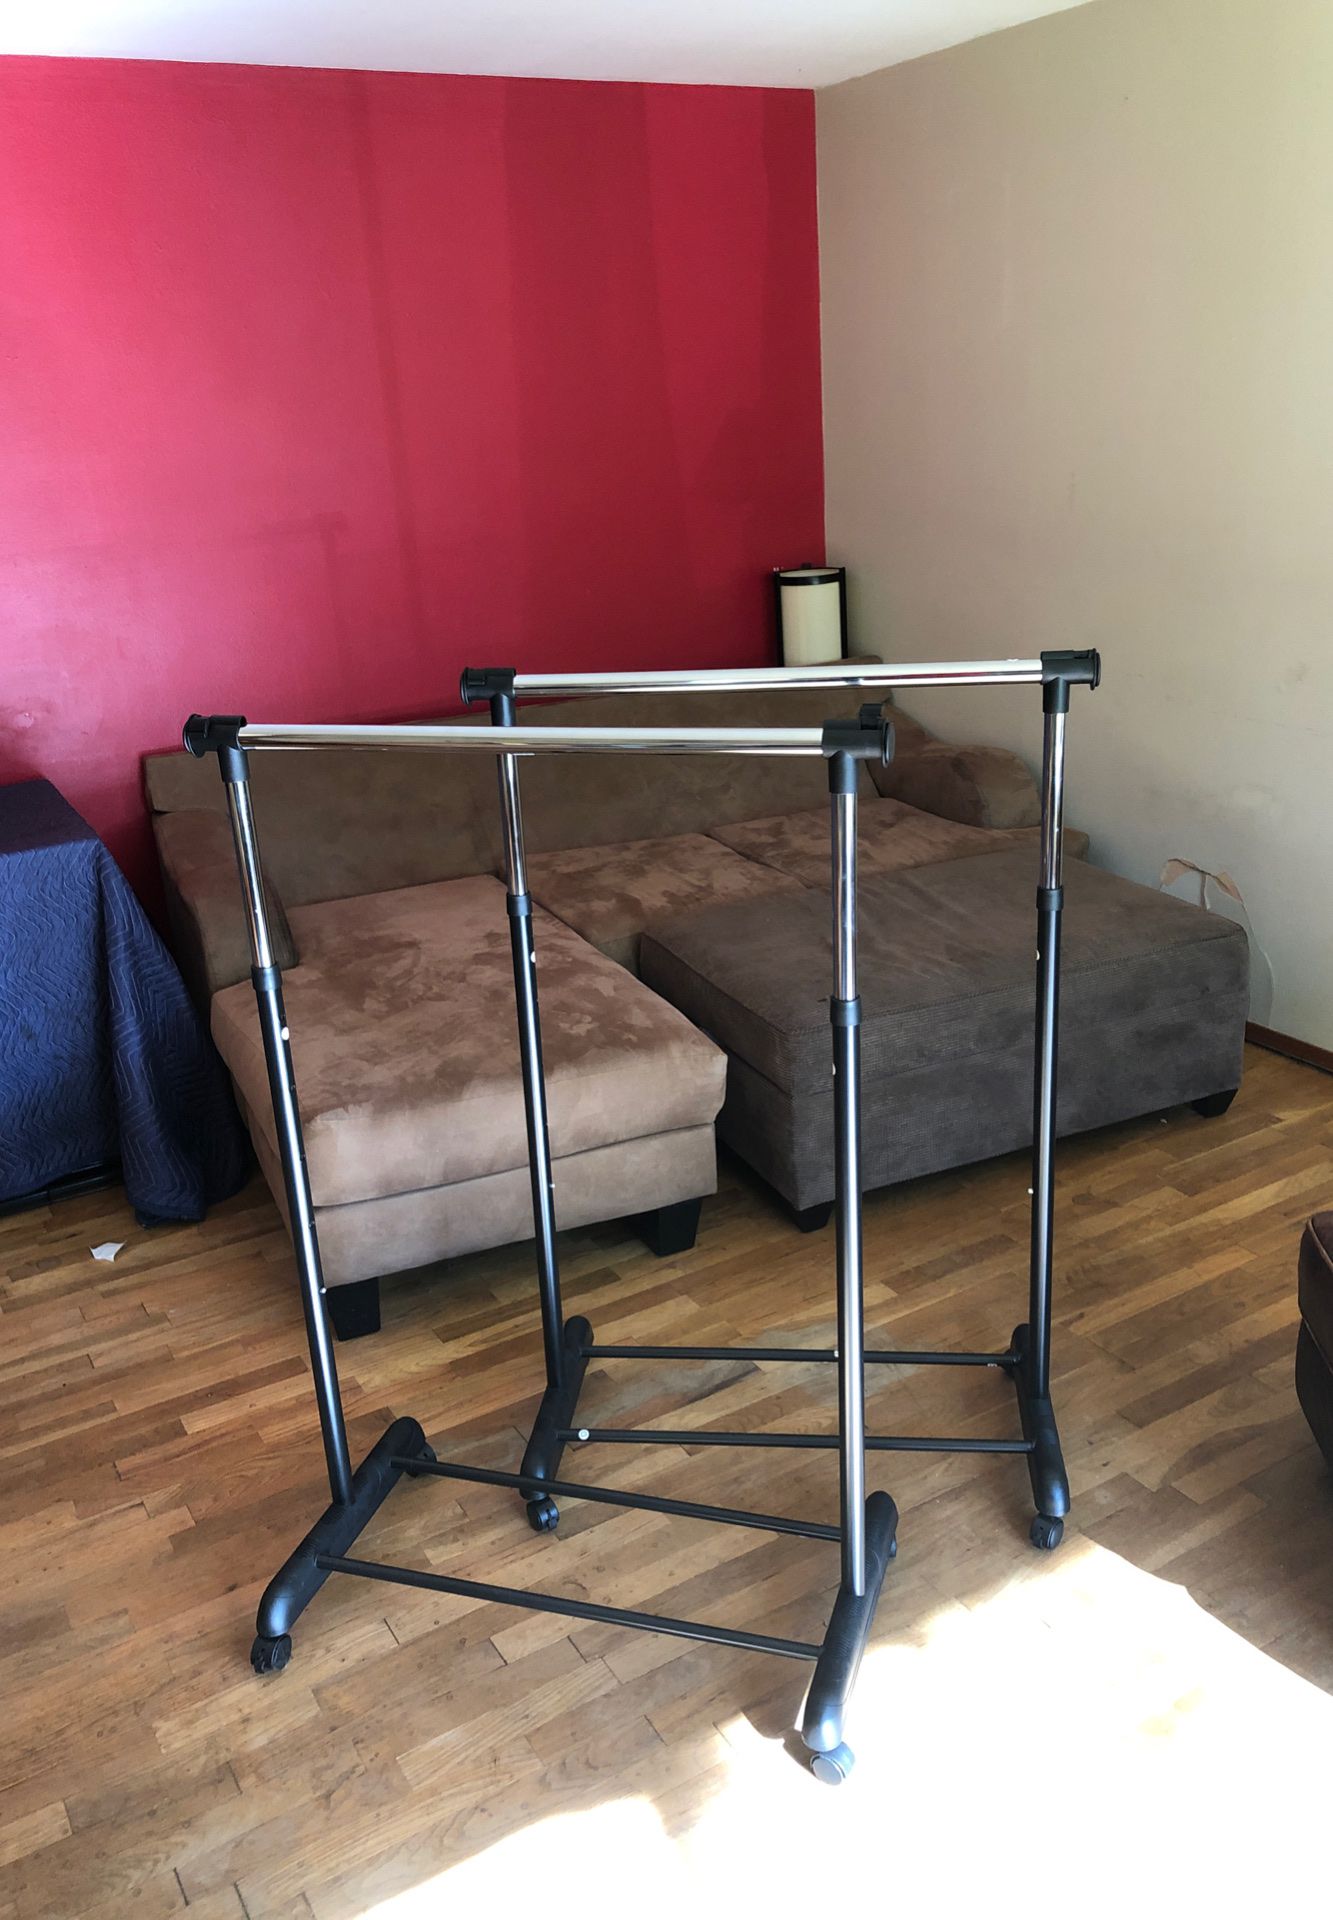 2 clothing racks from target